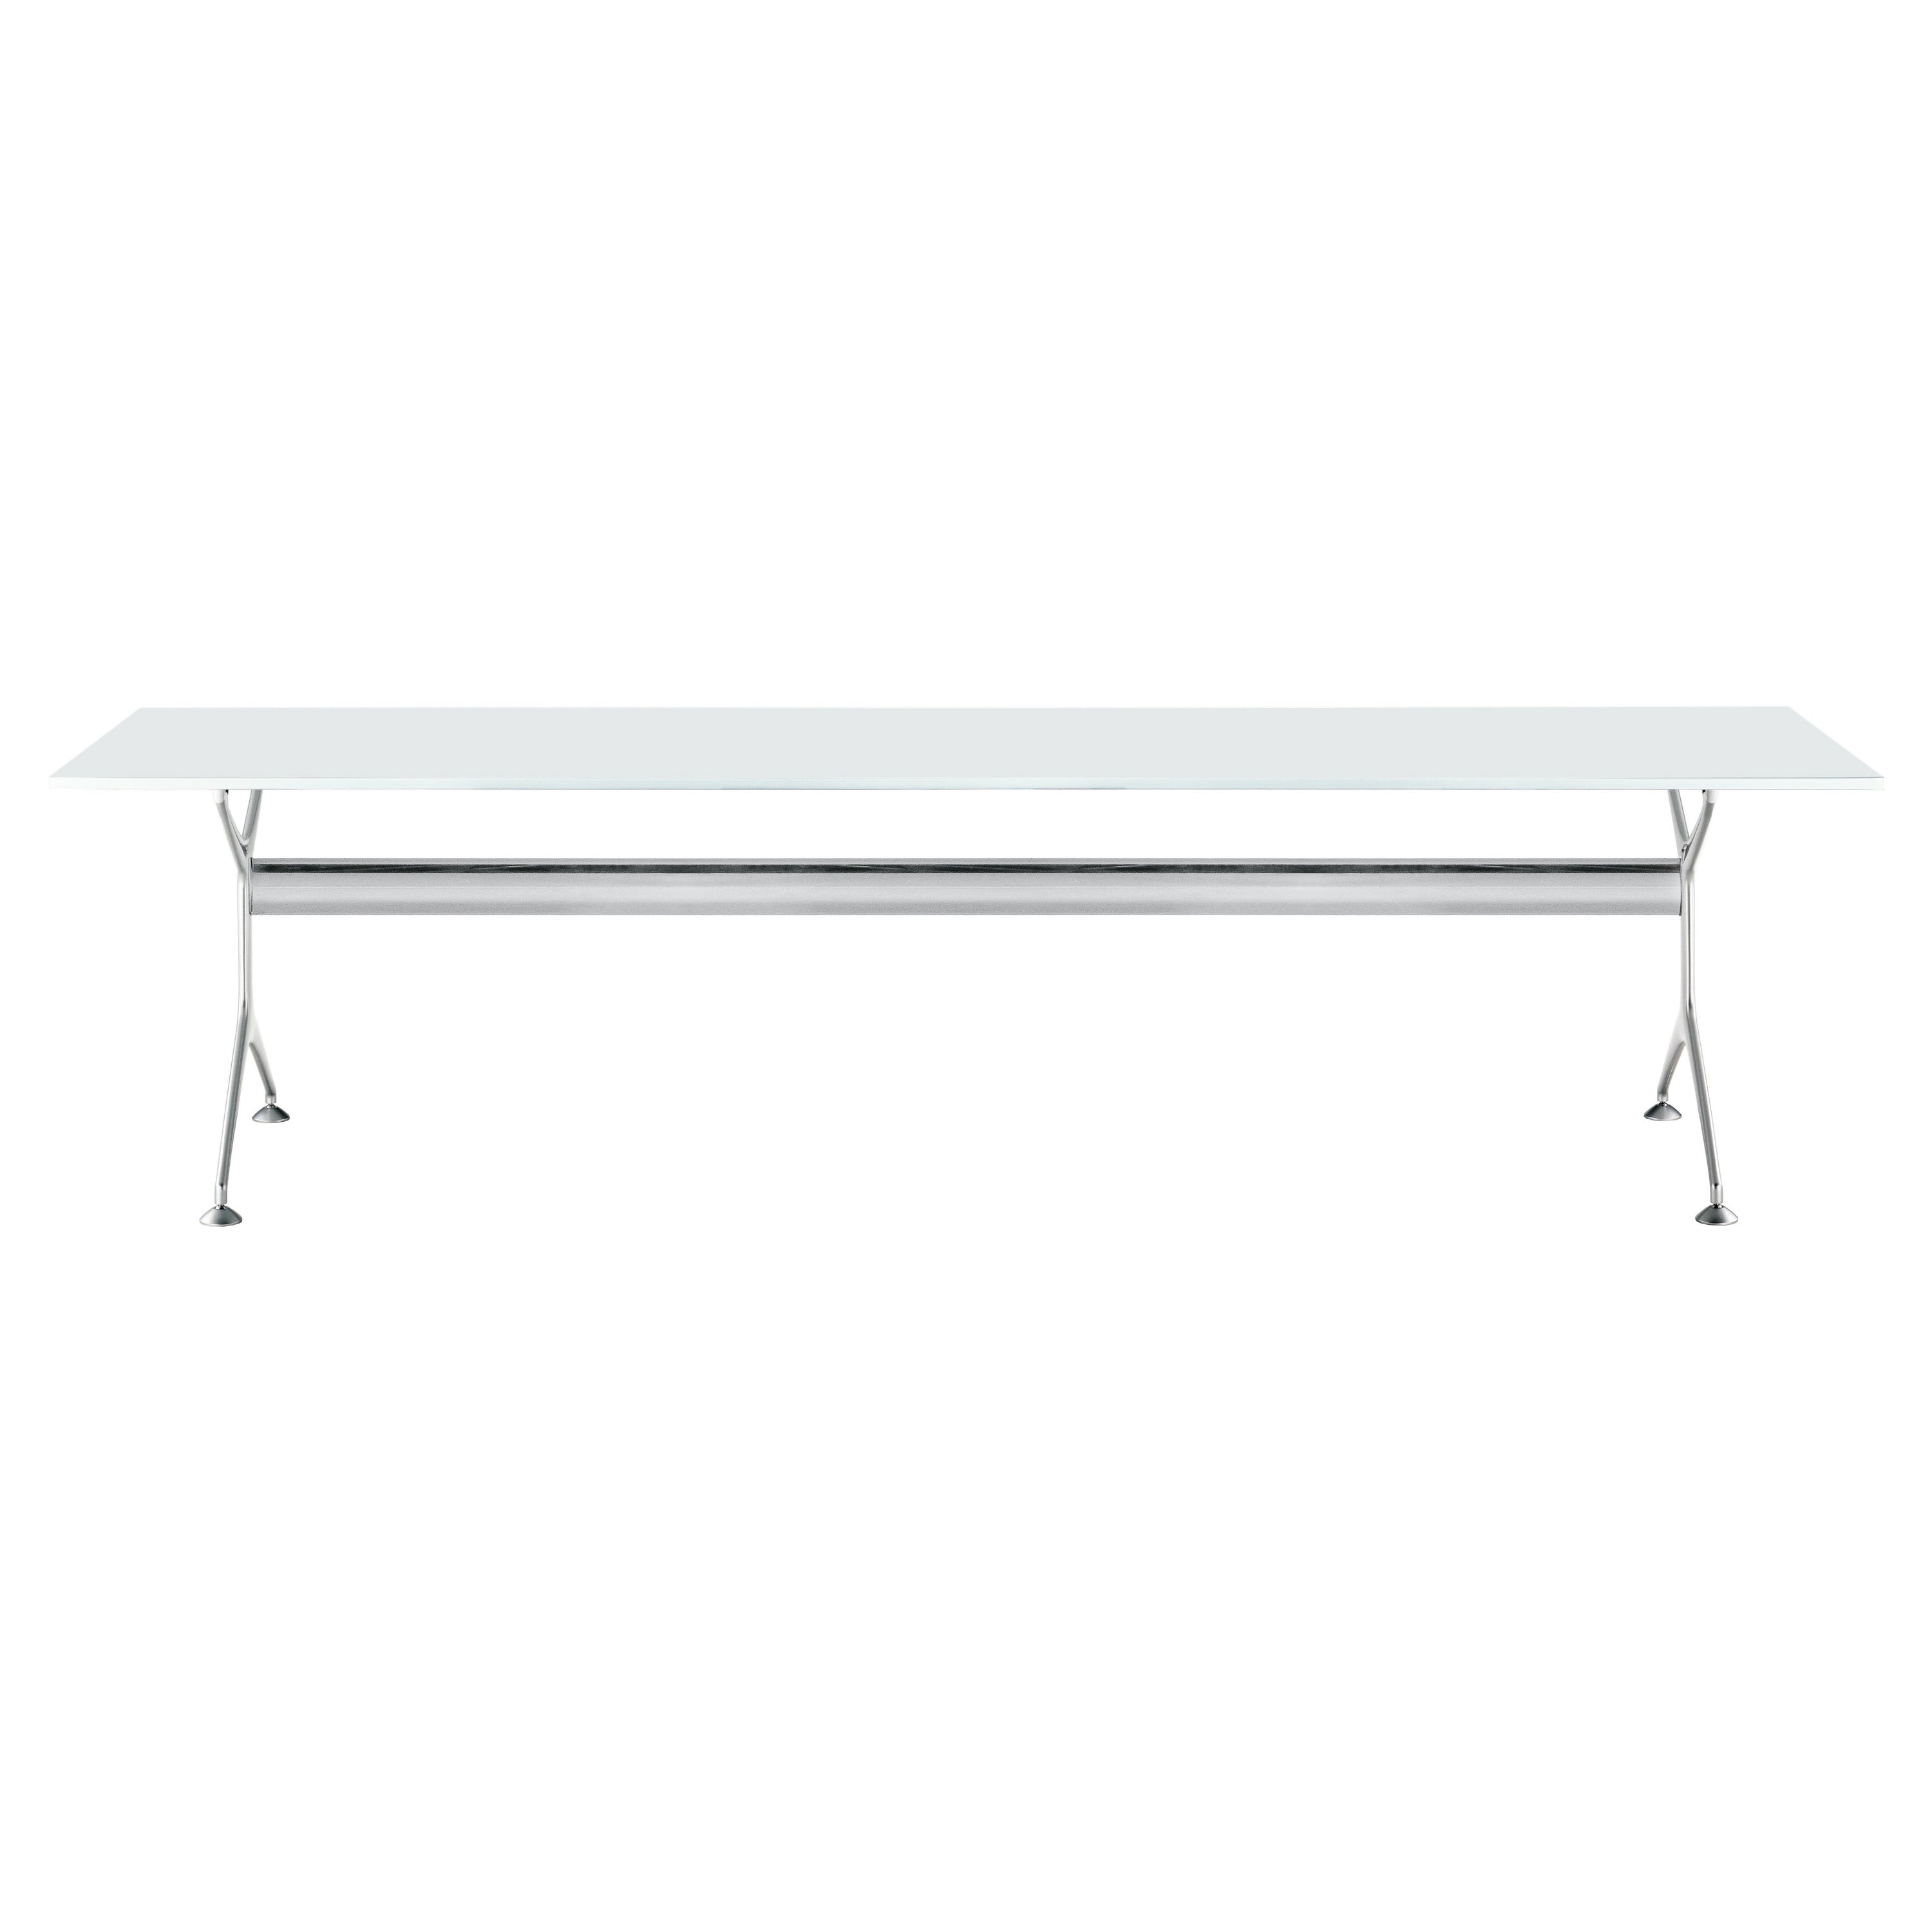 Alias Frametable 240 in White Top with Polished Aluminium Frame by Alberto Meda For Sale